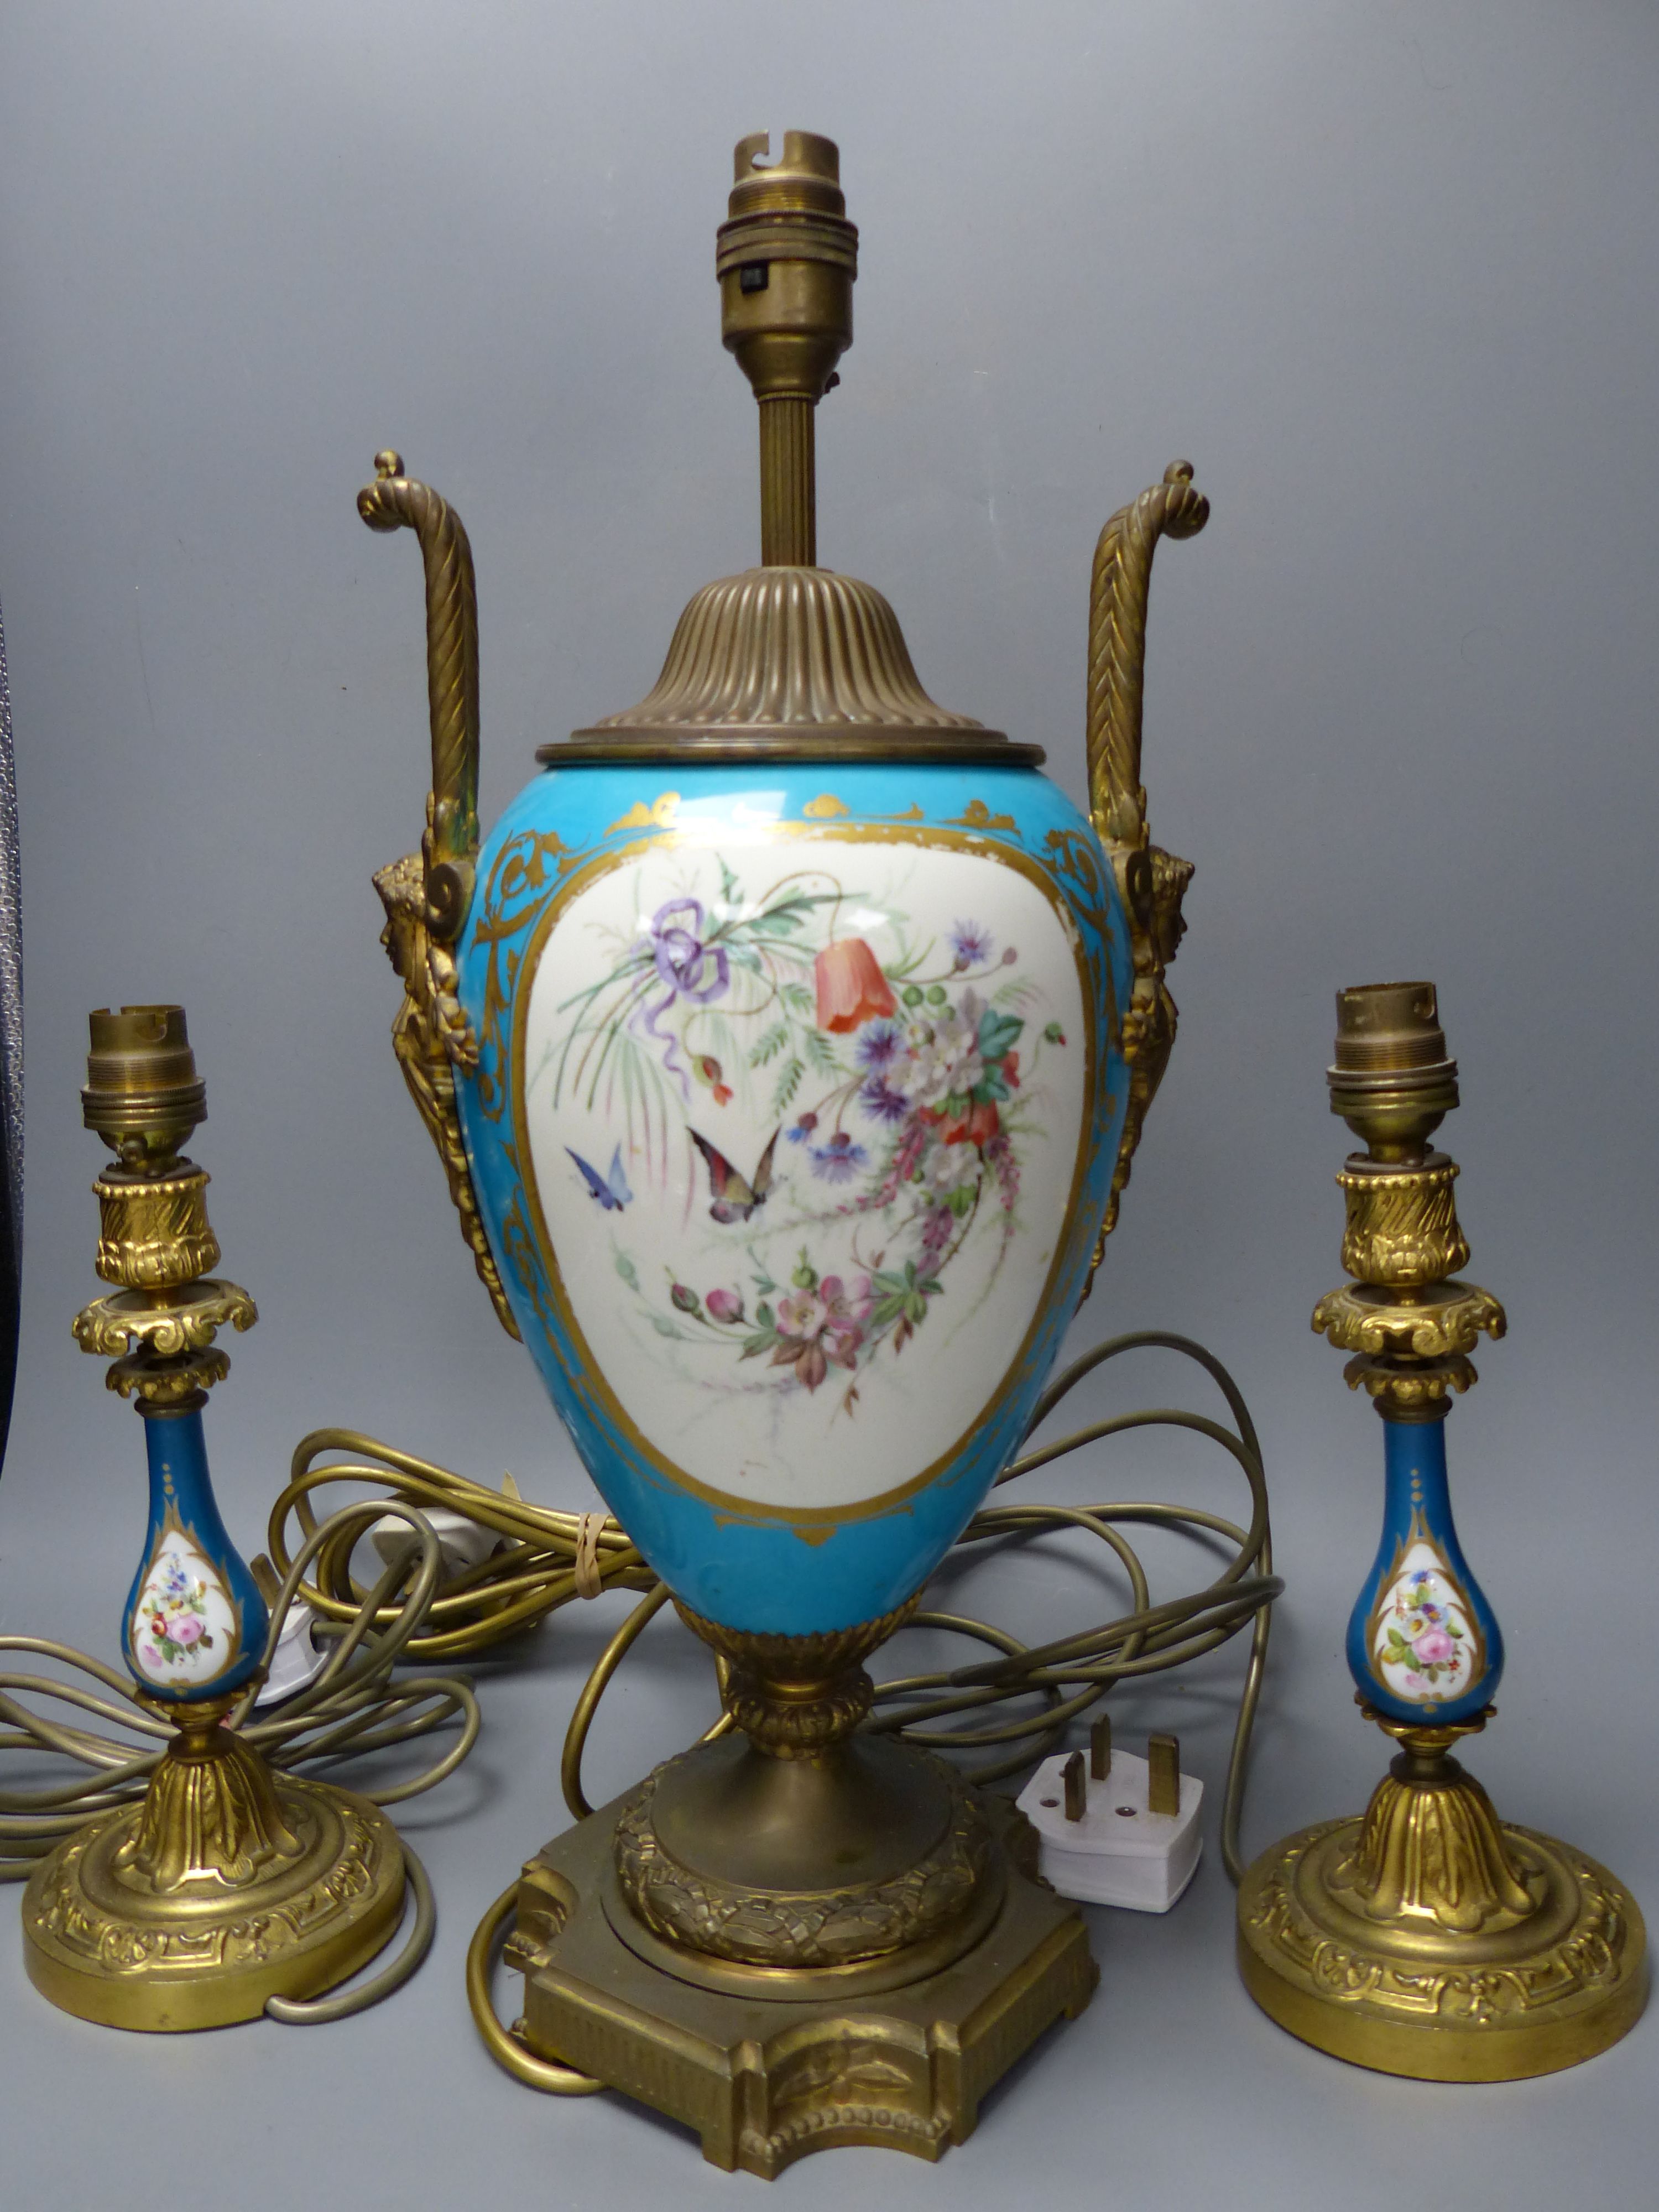 A pair of 19th century Sevres style porcelain and ormolu mounted lamps and a similar larger lamp